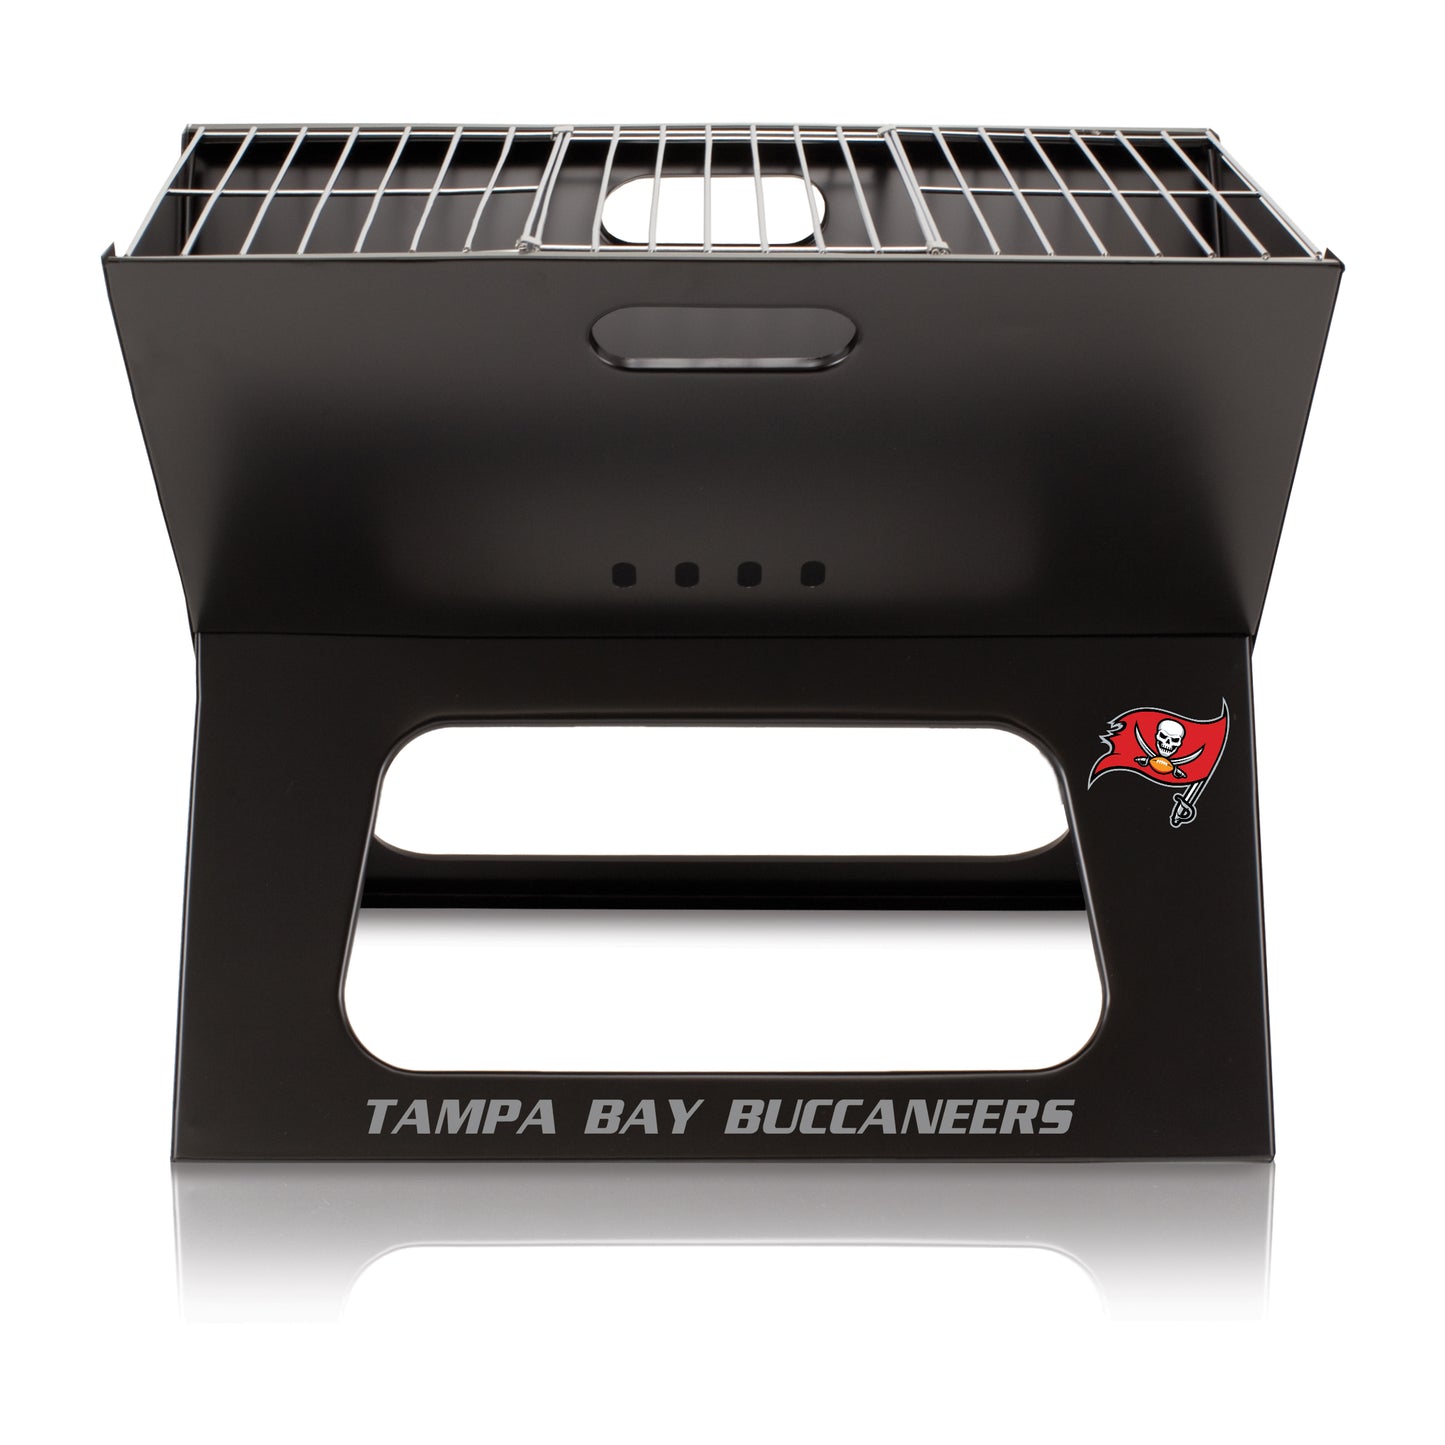 Tampa Bay Buccaneers - X-Grill Portable Charcoal BBQ Grill